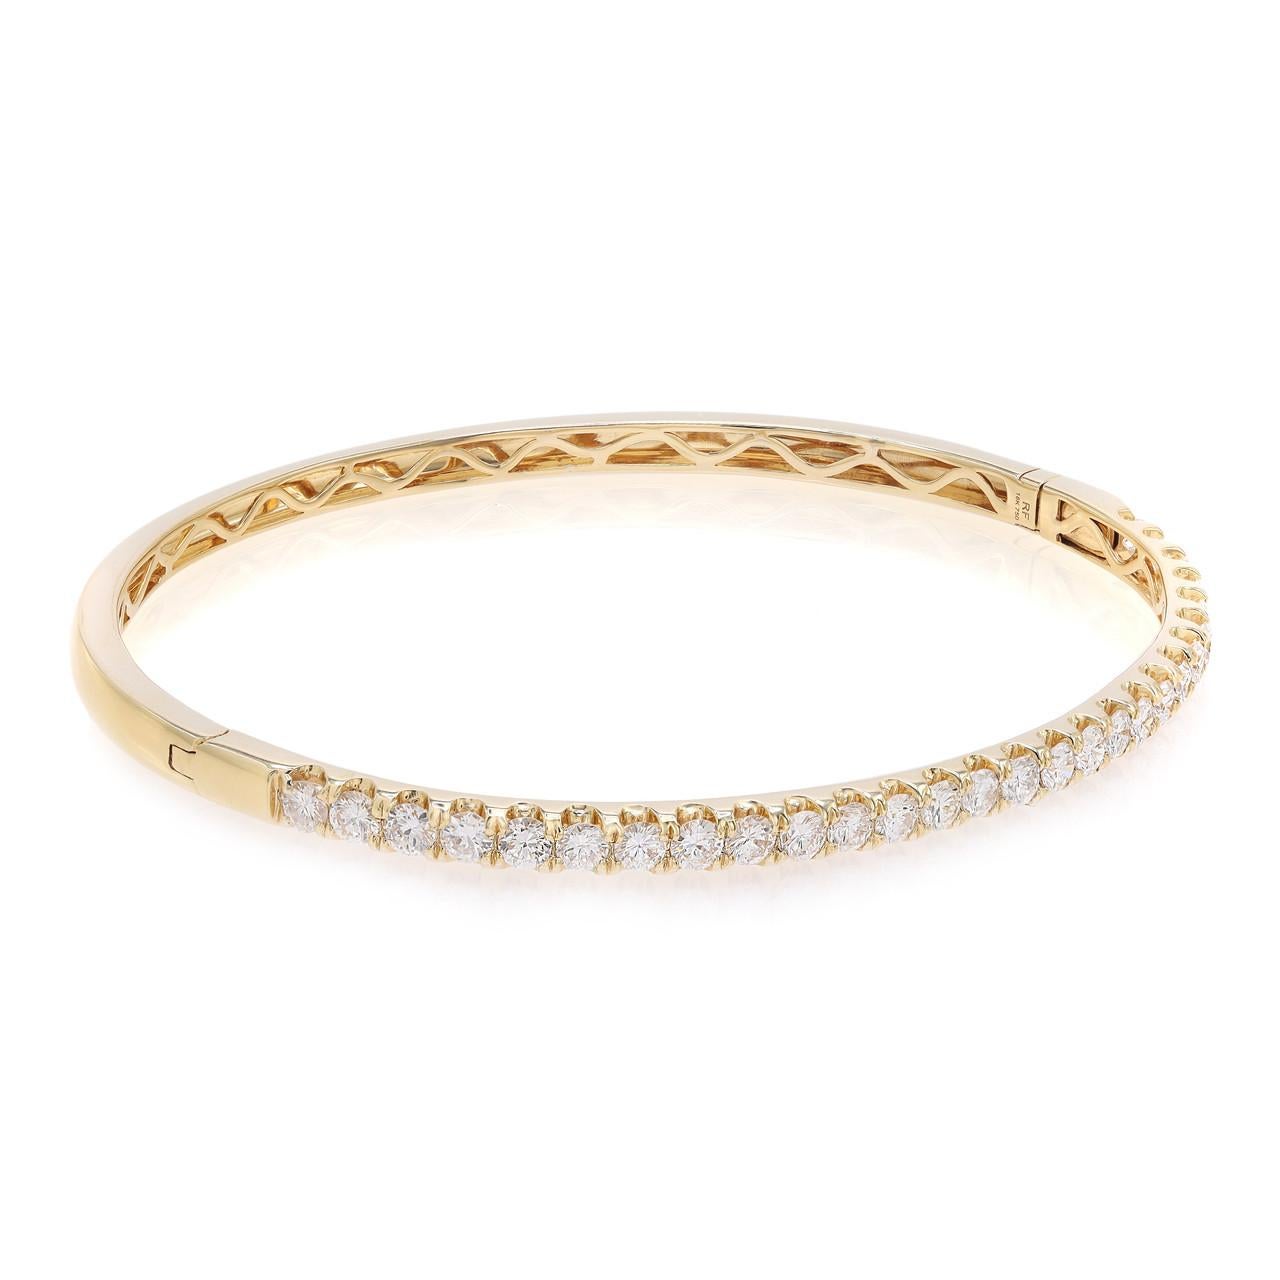 Introducing the versatile and elegant diamond bangle, a perfect blend of modernity and sophistication. This chic piece features over two carats of brilliant round diamonds, meticulously pavé set in 18k yellow gold. The lustrous yellow gold